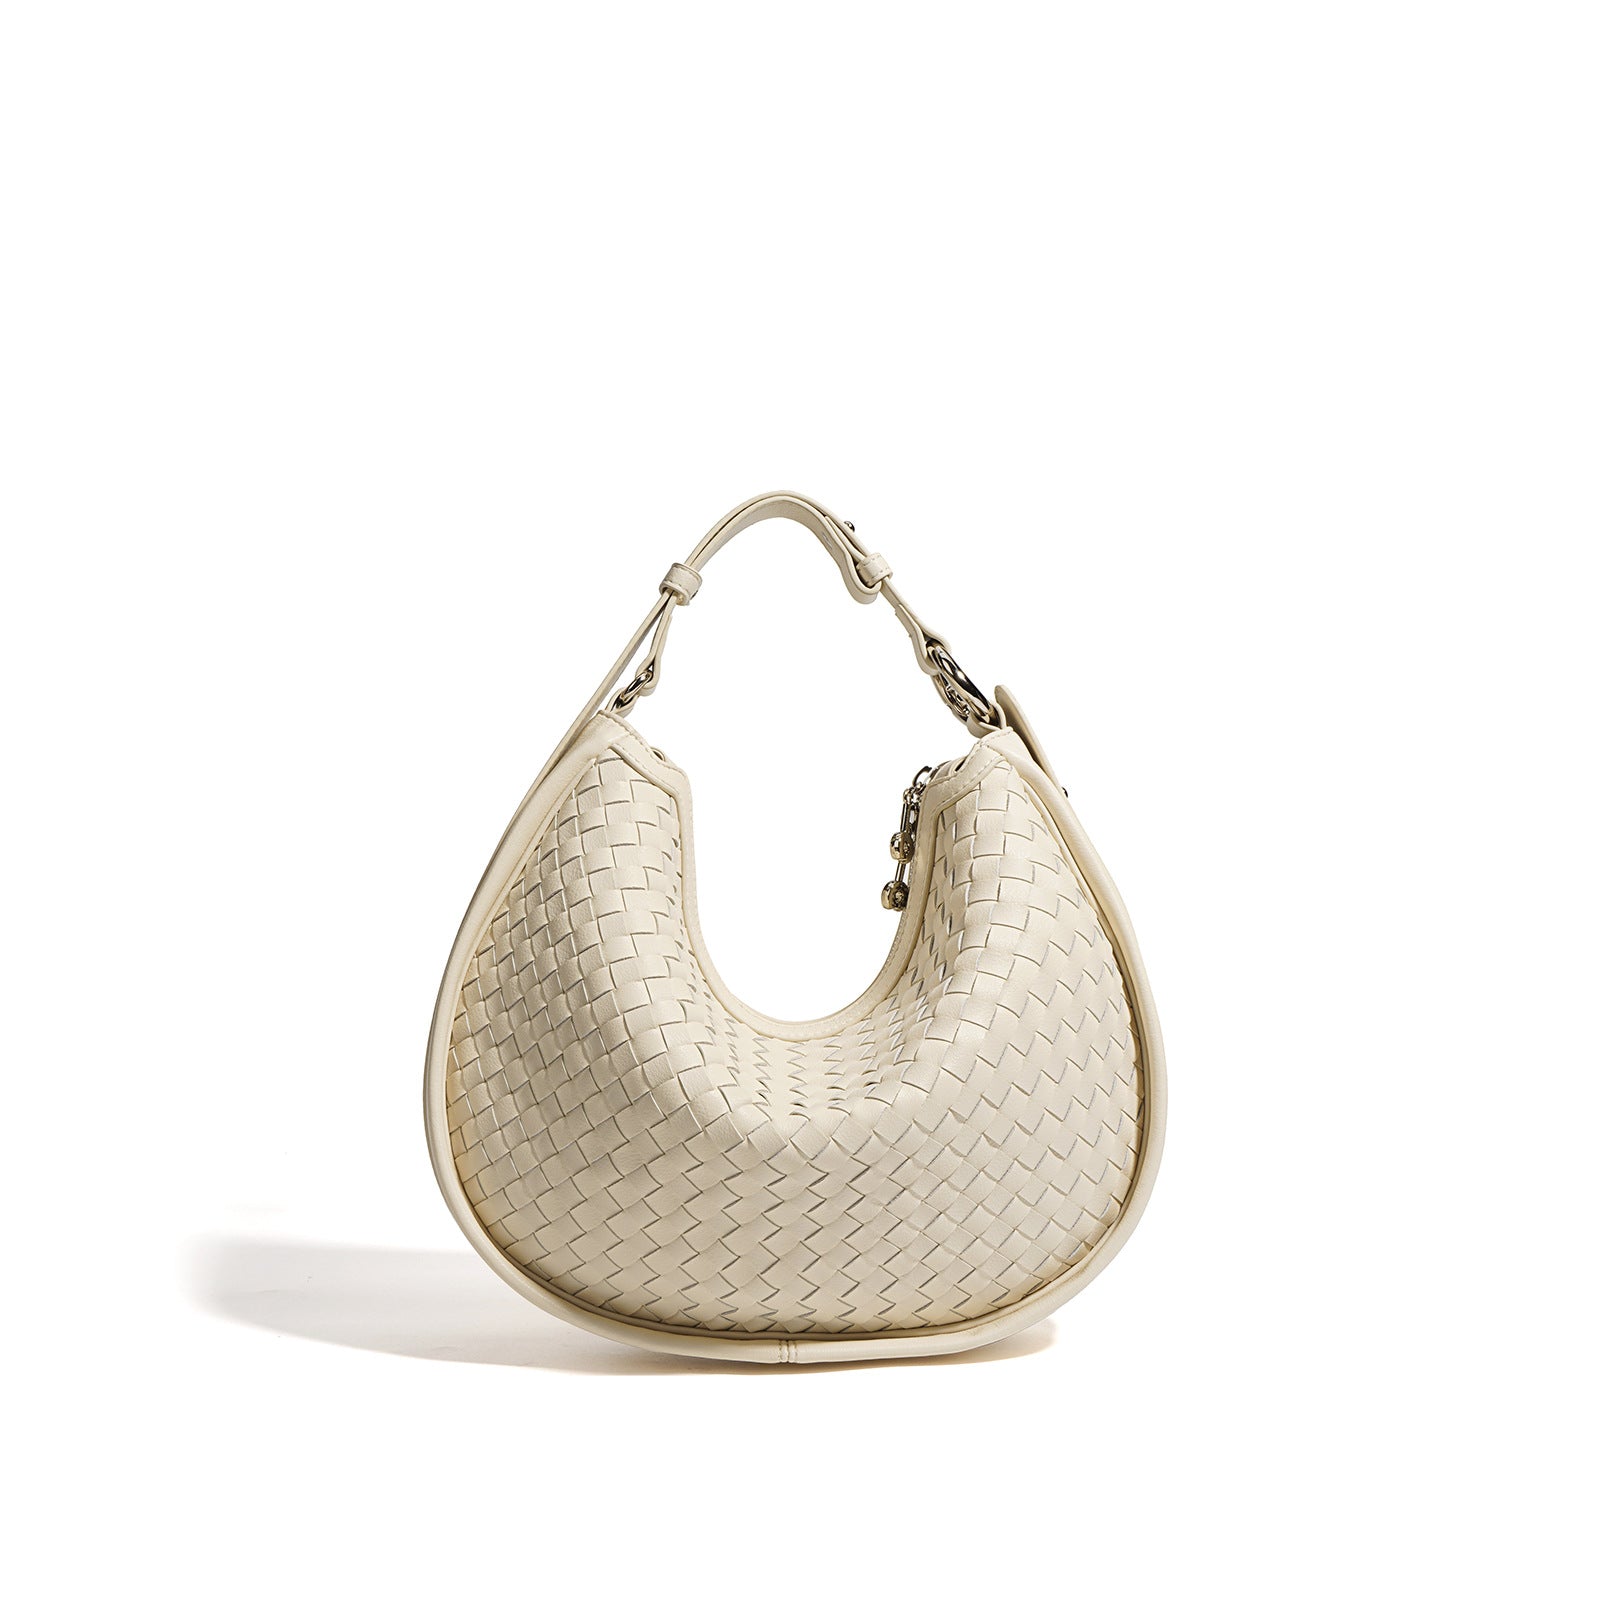 Sophisticated Handwoven Leather Tote Bag for Fashion-forward Women